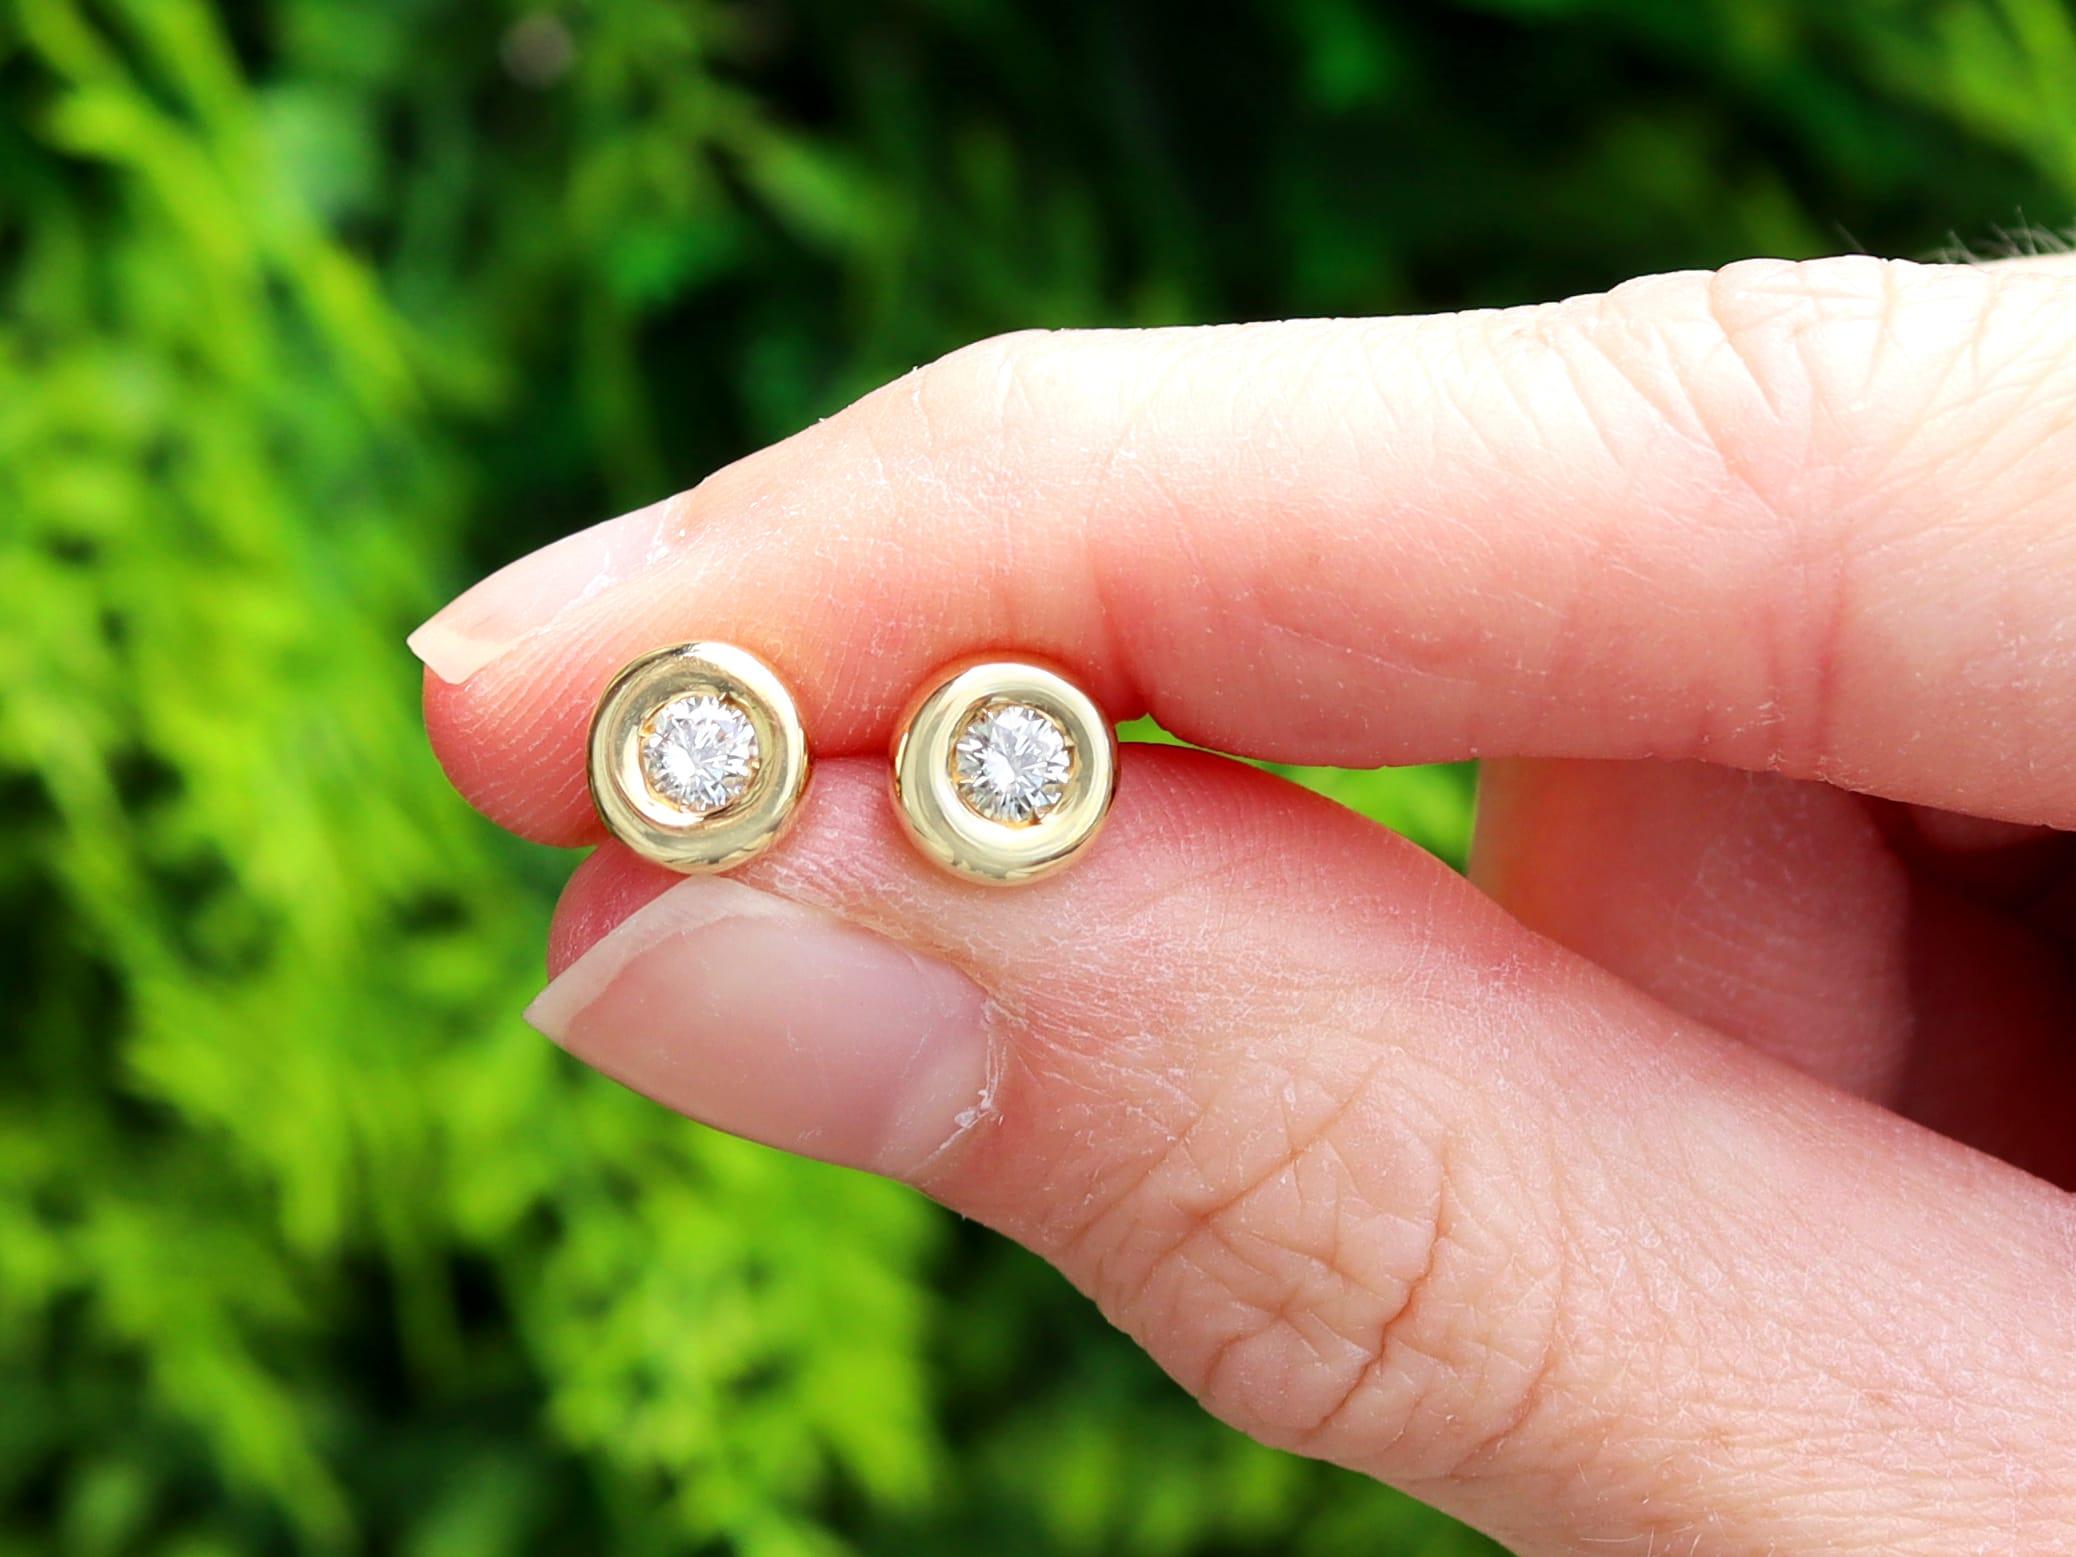 A fine and impressive pair of vintage 0.40 carat single stone diamond and 18 karat yellow gold stud earrings; part of our vintage stud earring collections.

These fine and impressive vintage stud earrings have been crafted in 18k yellow gold.

The